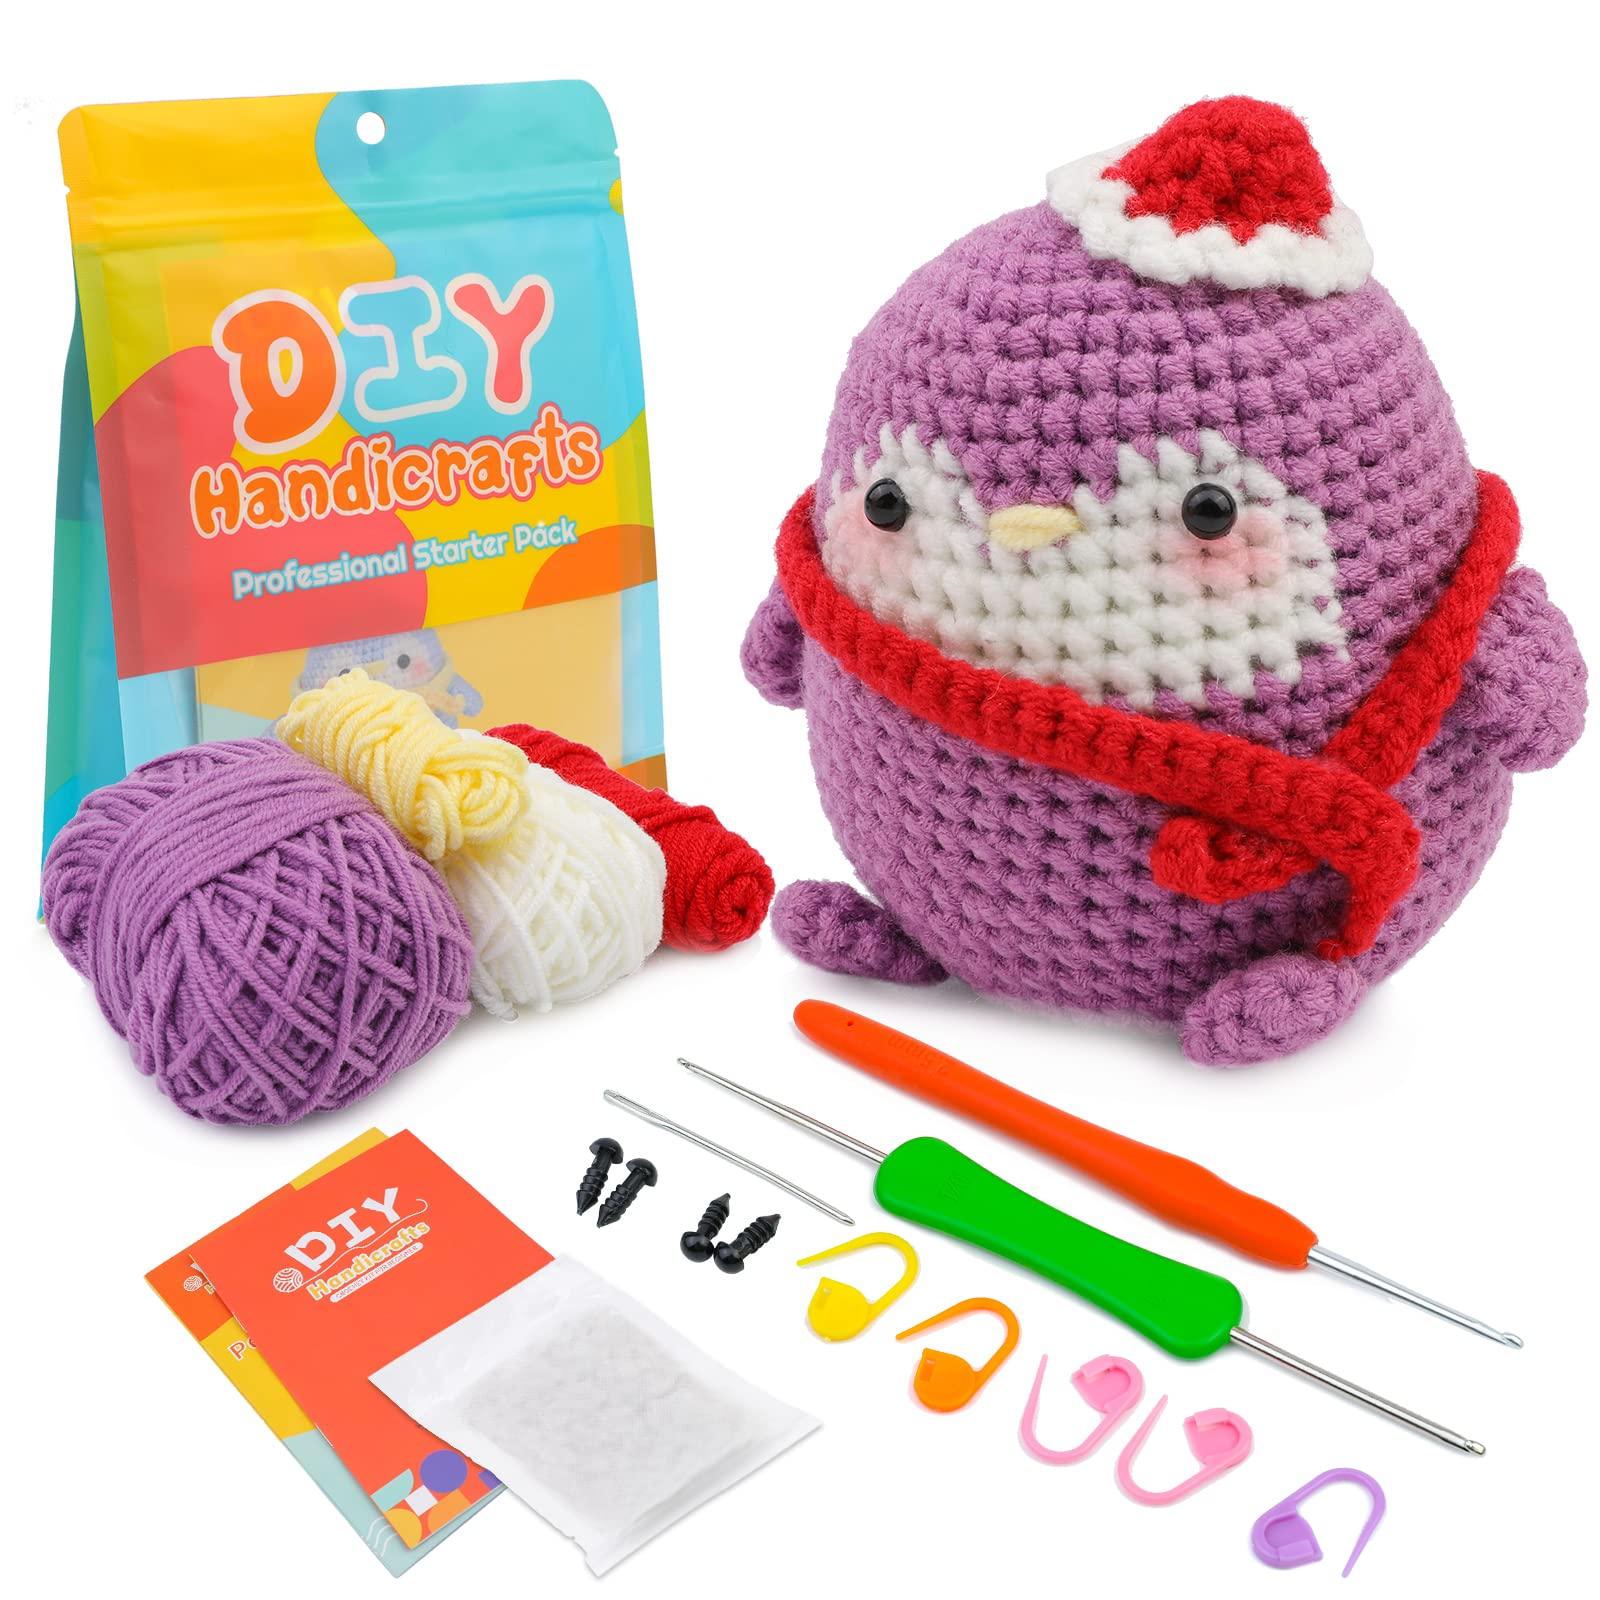  Crochet Kit for Beginners: Crochet Animals Kit with Yarn,  Crocheted Gift Box with Scenic Display, Step-by-Step Video Tutorials for  Adults Kids, DIY Knitting Supplies (Fox)